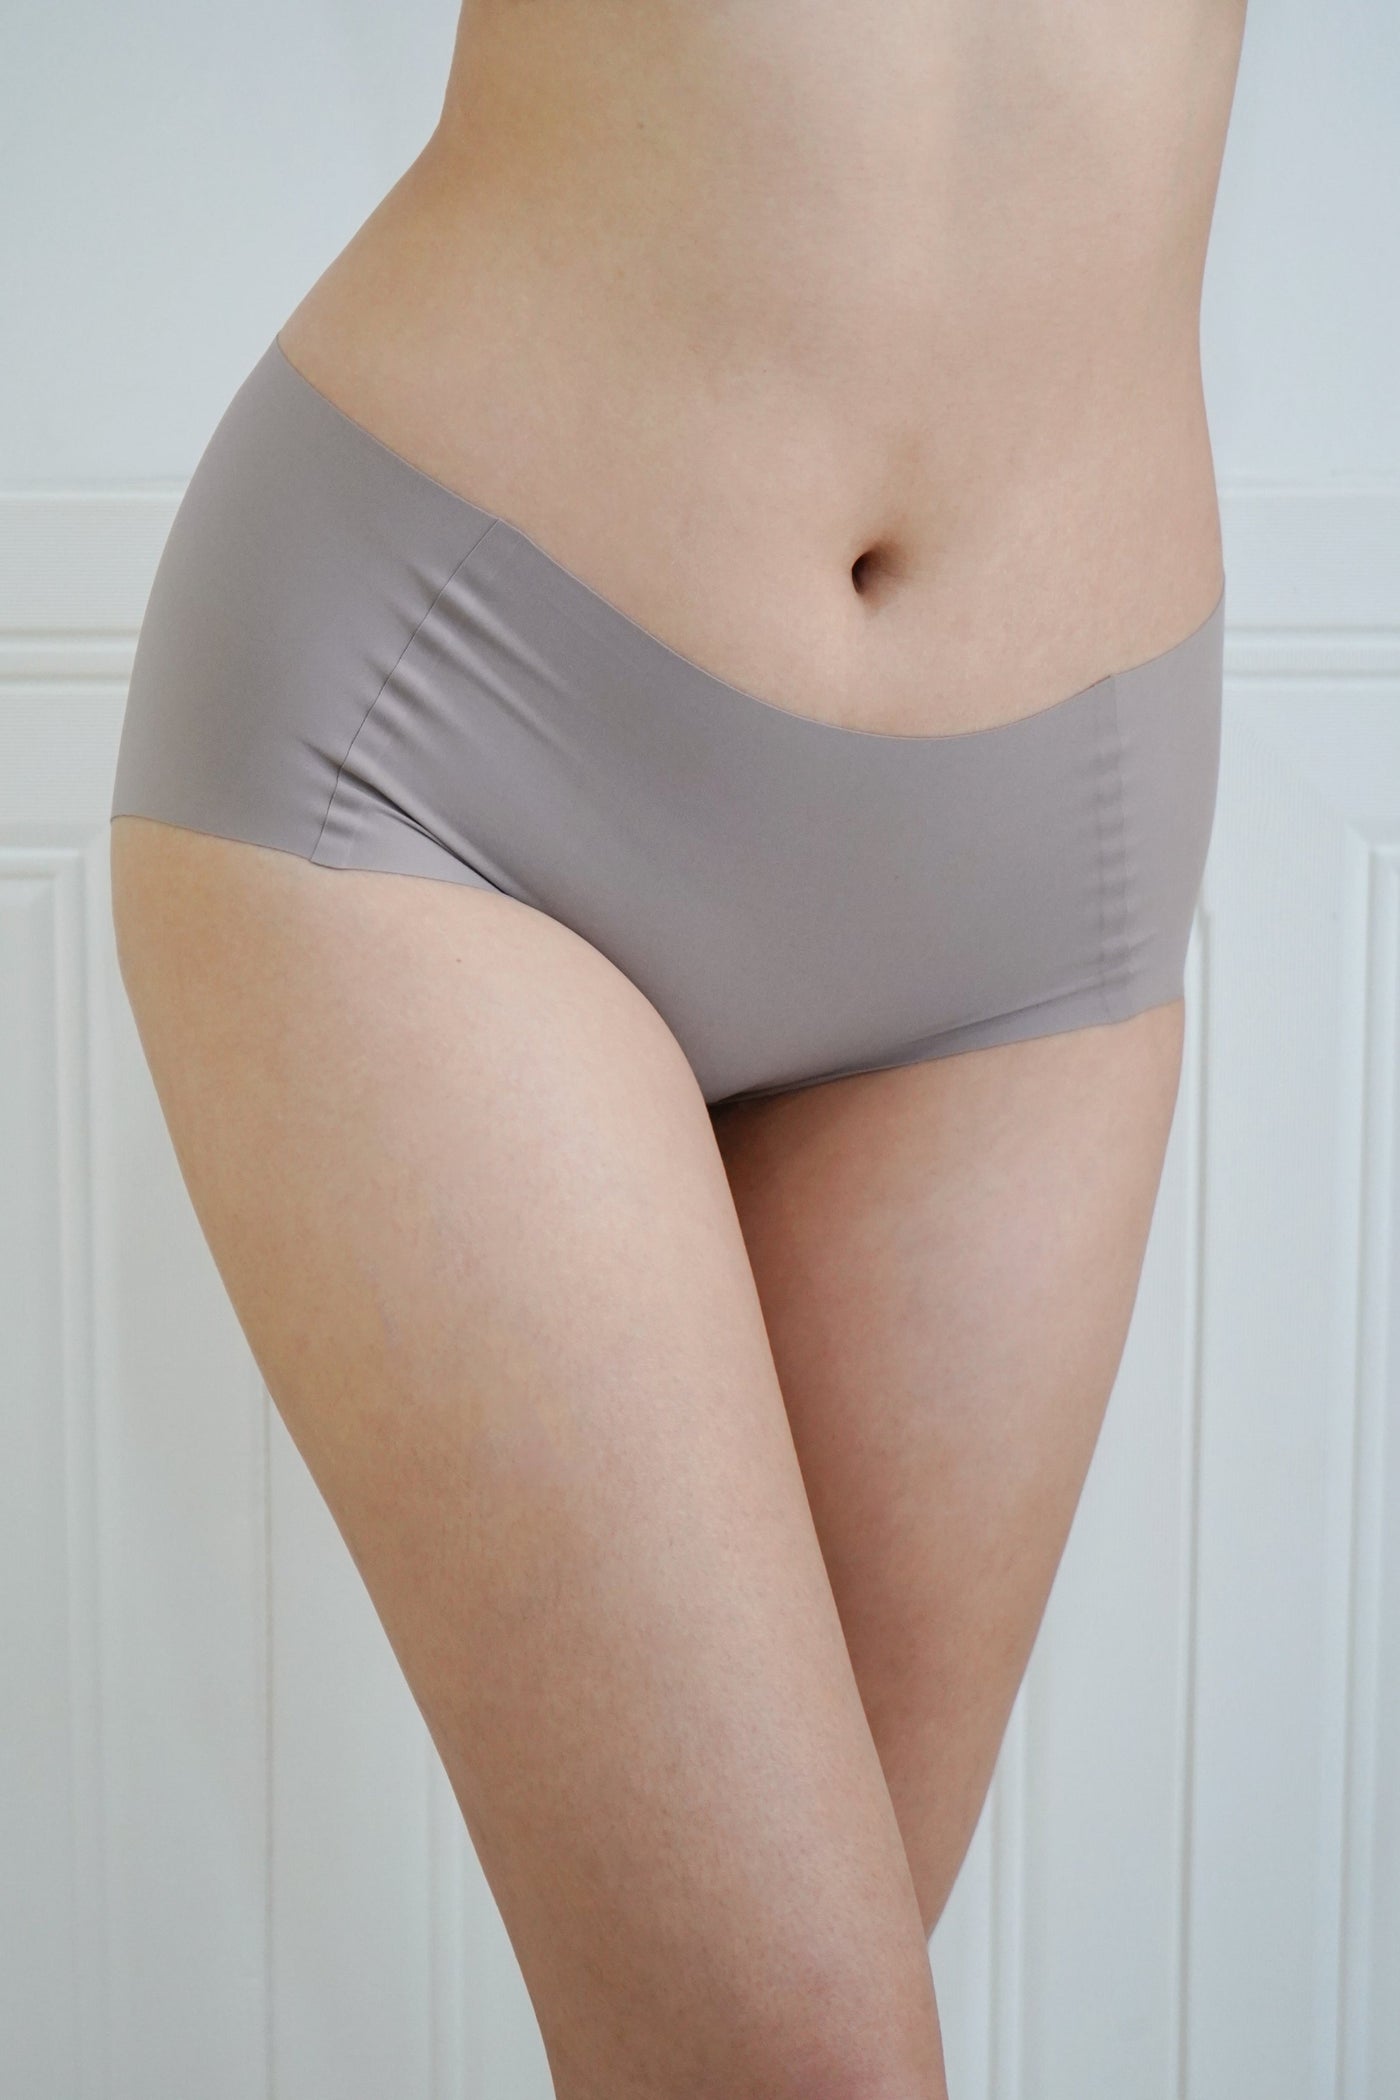 Limited Free Panty | Wear Nothing Seamless Antibacterial Panty (Order over RM300)